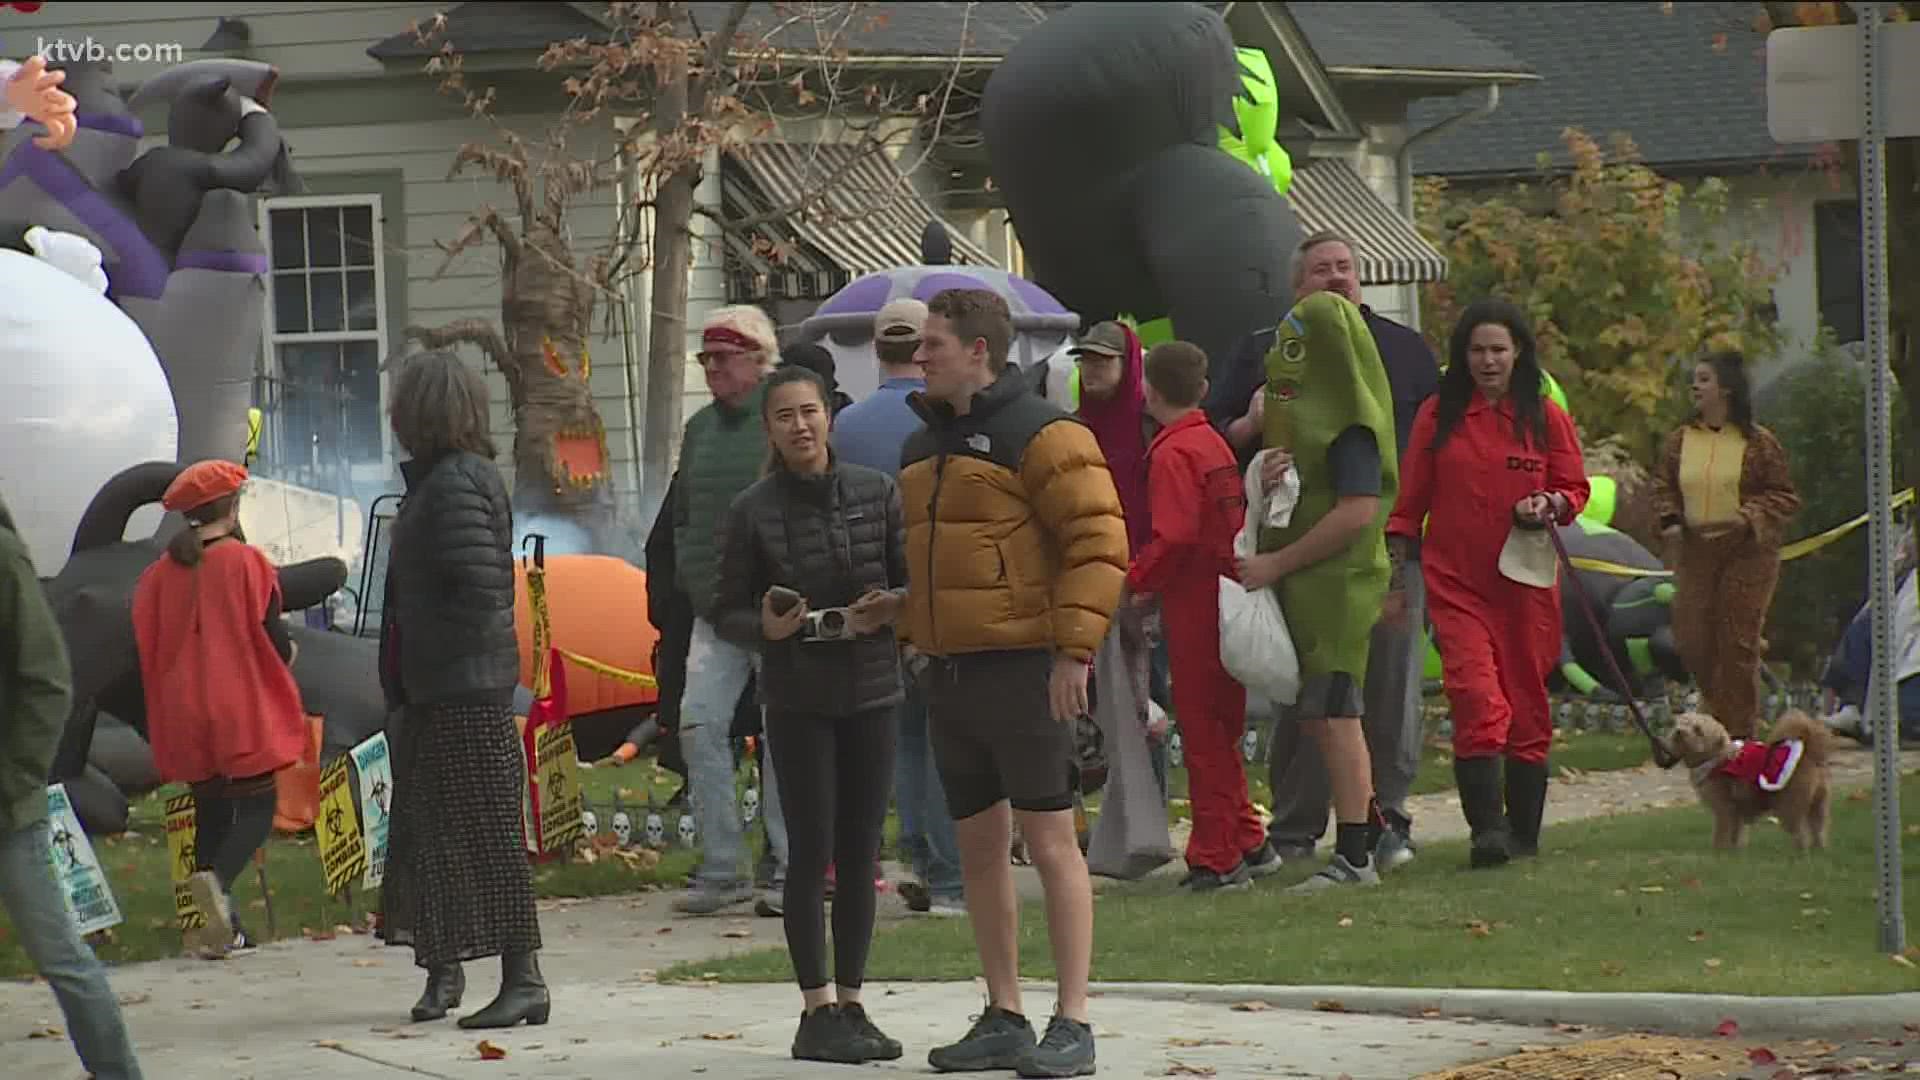 Boise's Harrison Boulevard Will Close for Trick-Or-Treaters